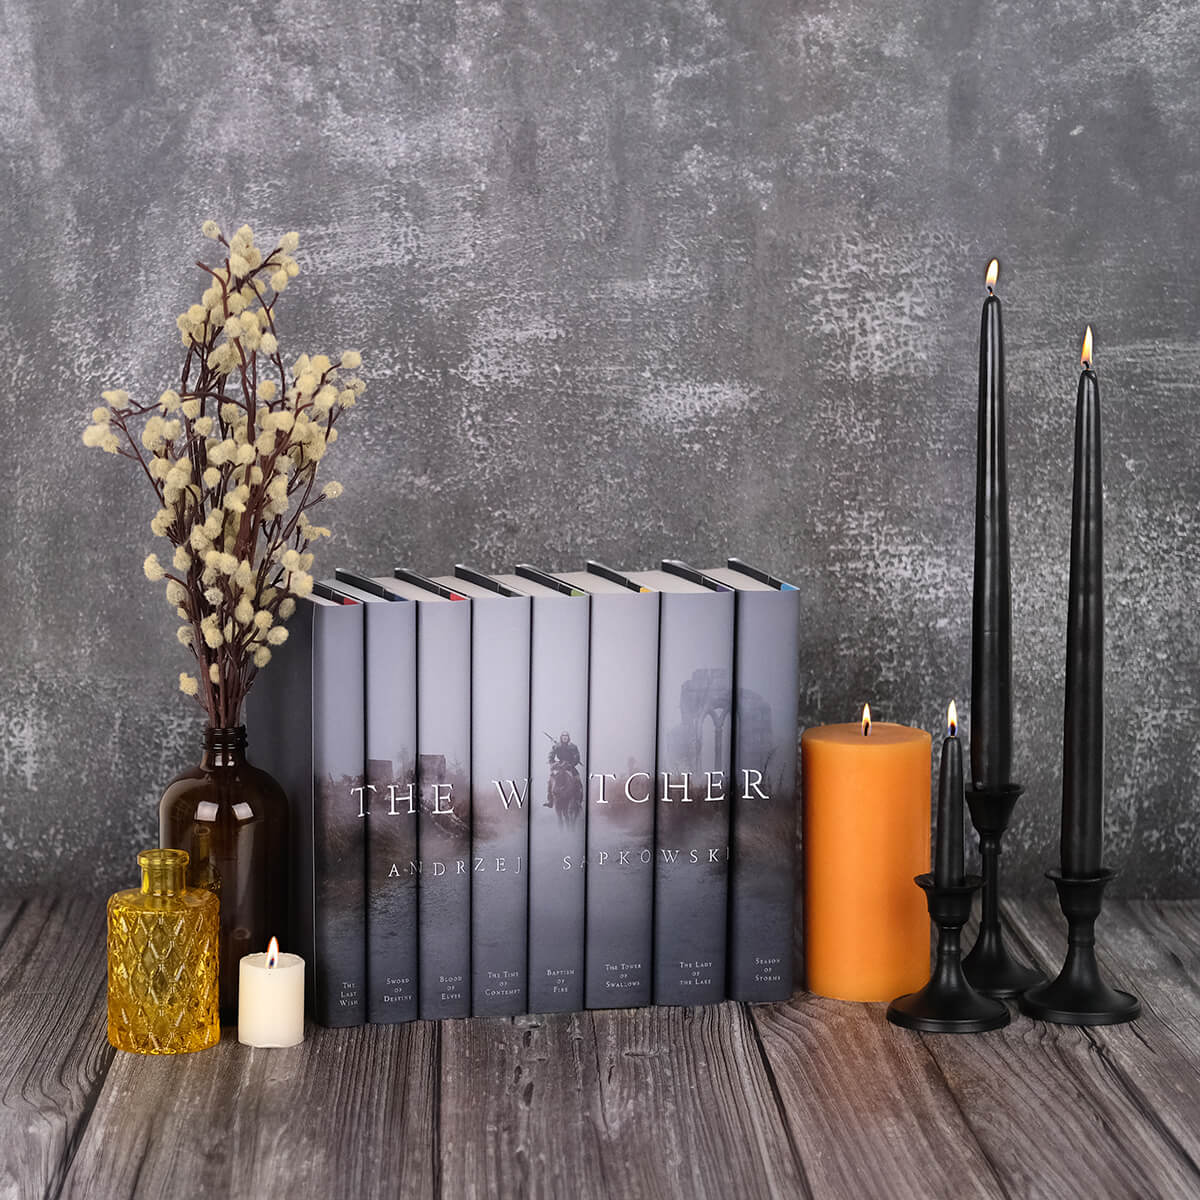 Install shot of the Witcher book set from Juniper Custom. Book set sits against grey stone background surrounded by lit candles and glass bottles.